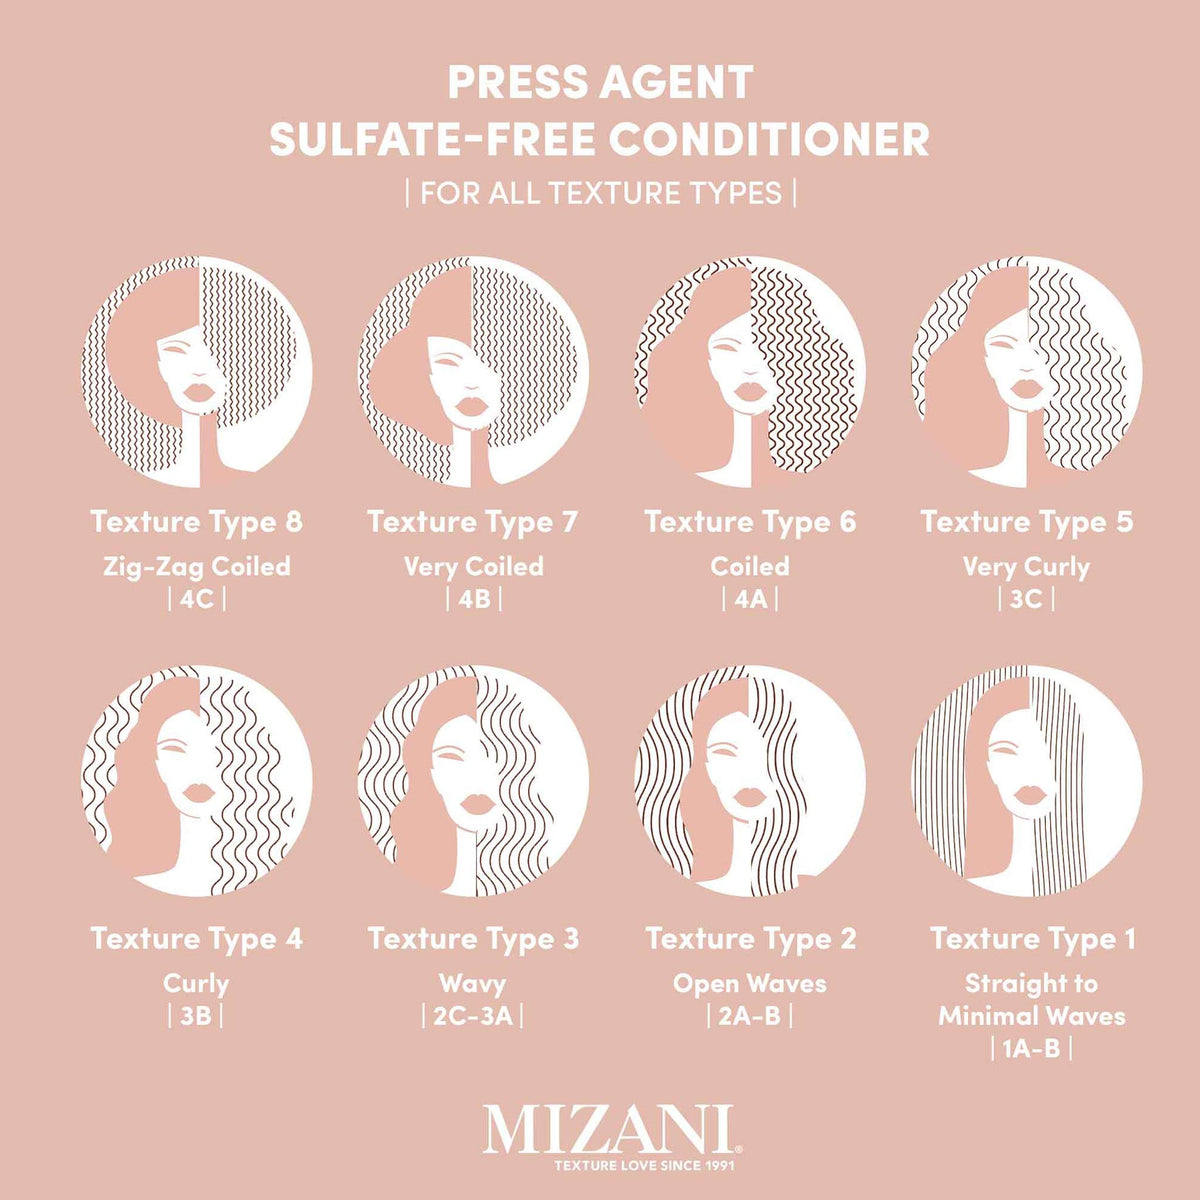 Mizani Press Agent Thermal Smoothing Sulfate-Free Conditioner 250ml